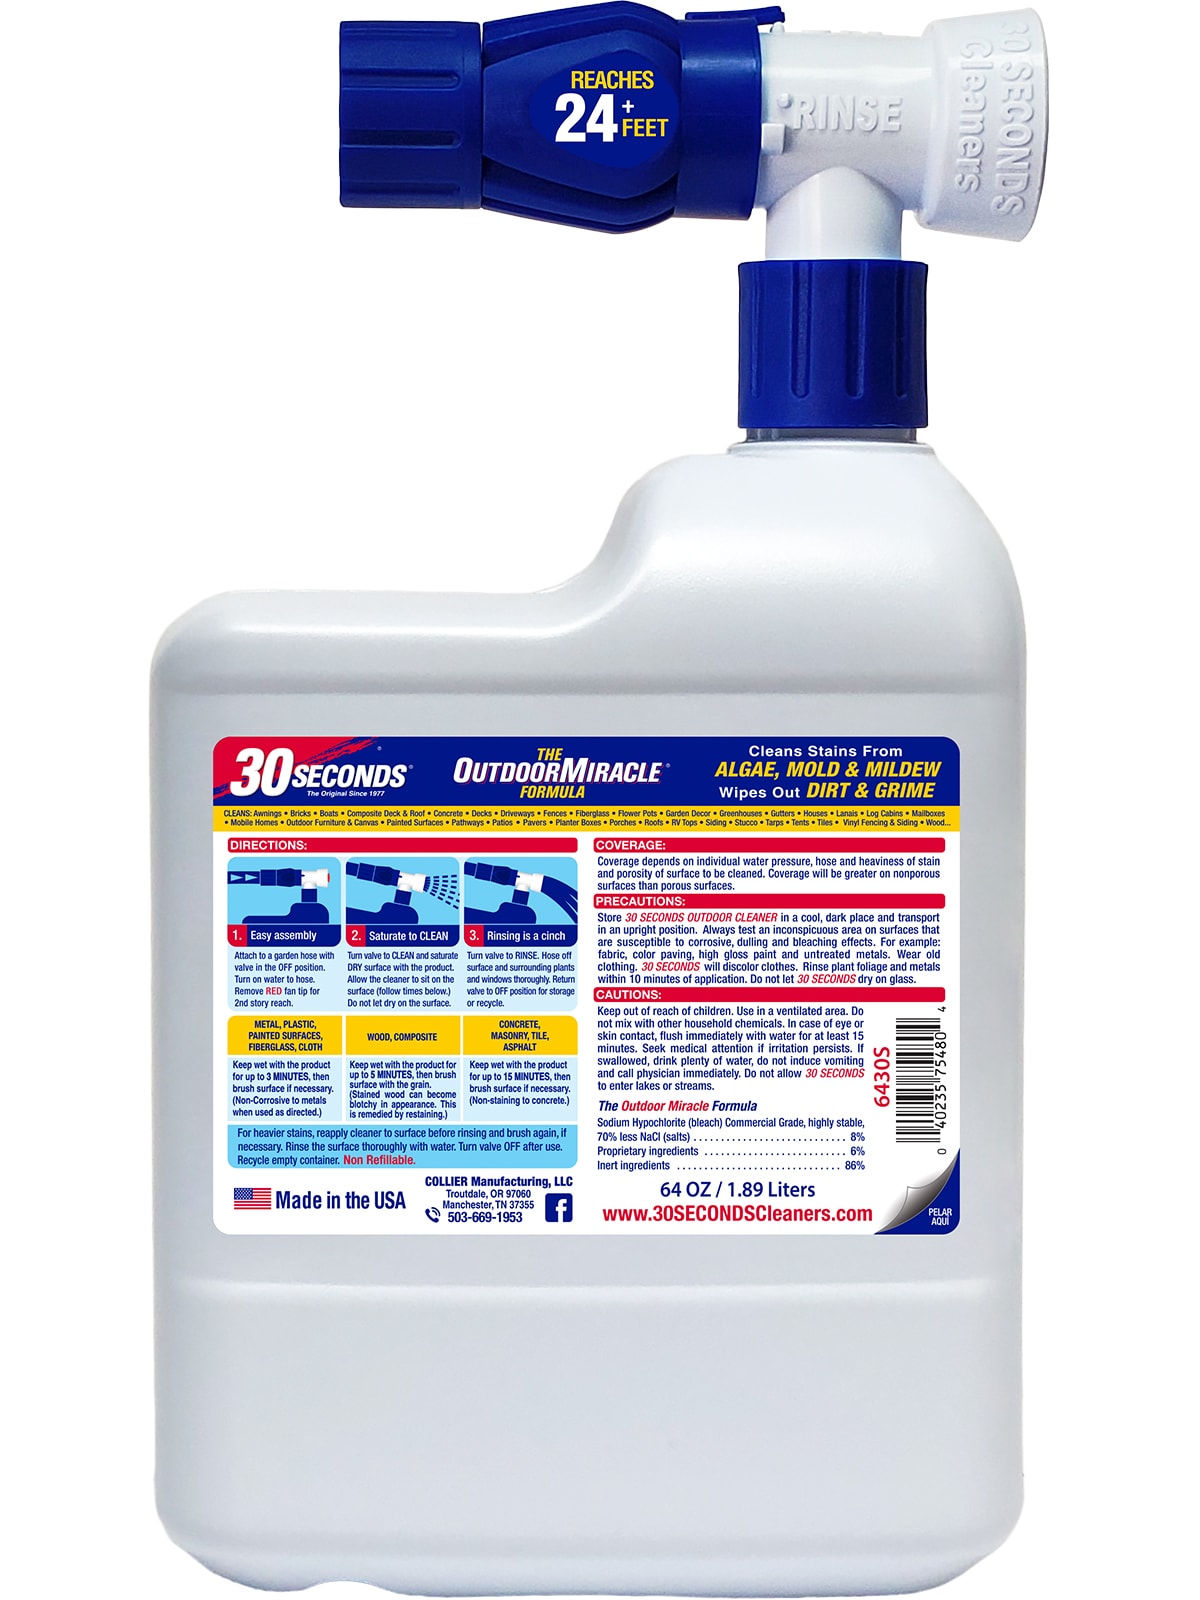 Marine 31 Mildew Stain Remover & Cleaner - Marine & Boat, Home & Patio,  Bathroom & Shower Cleaner, 32oz.